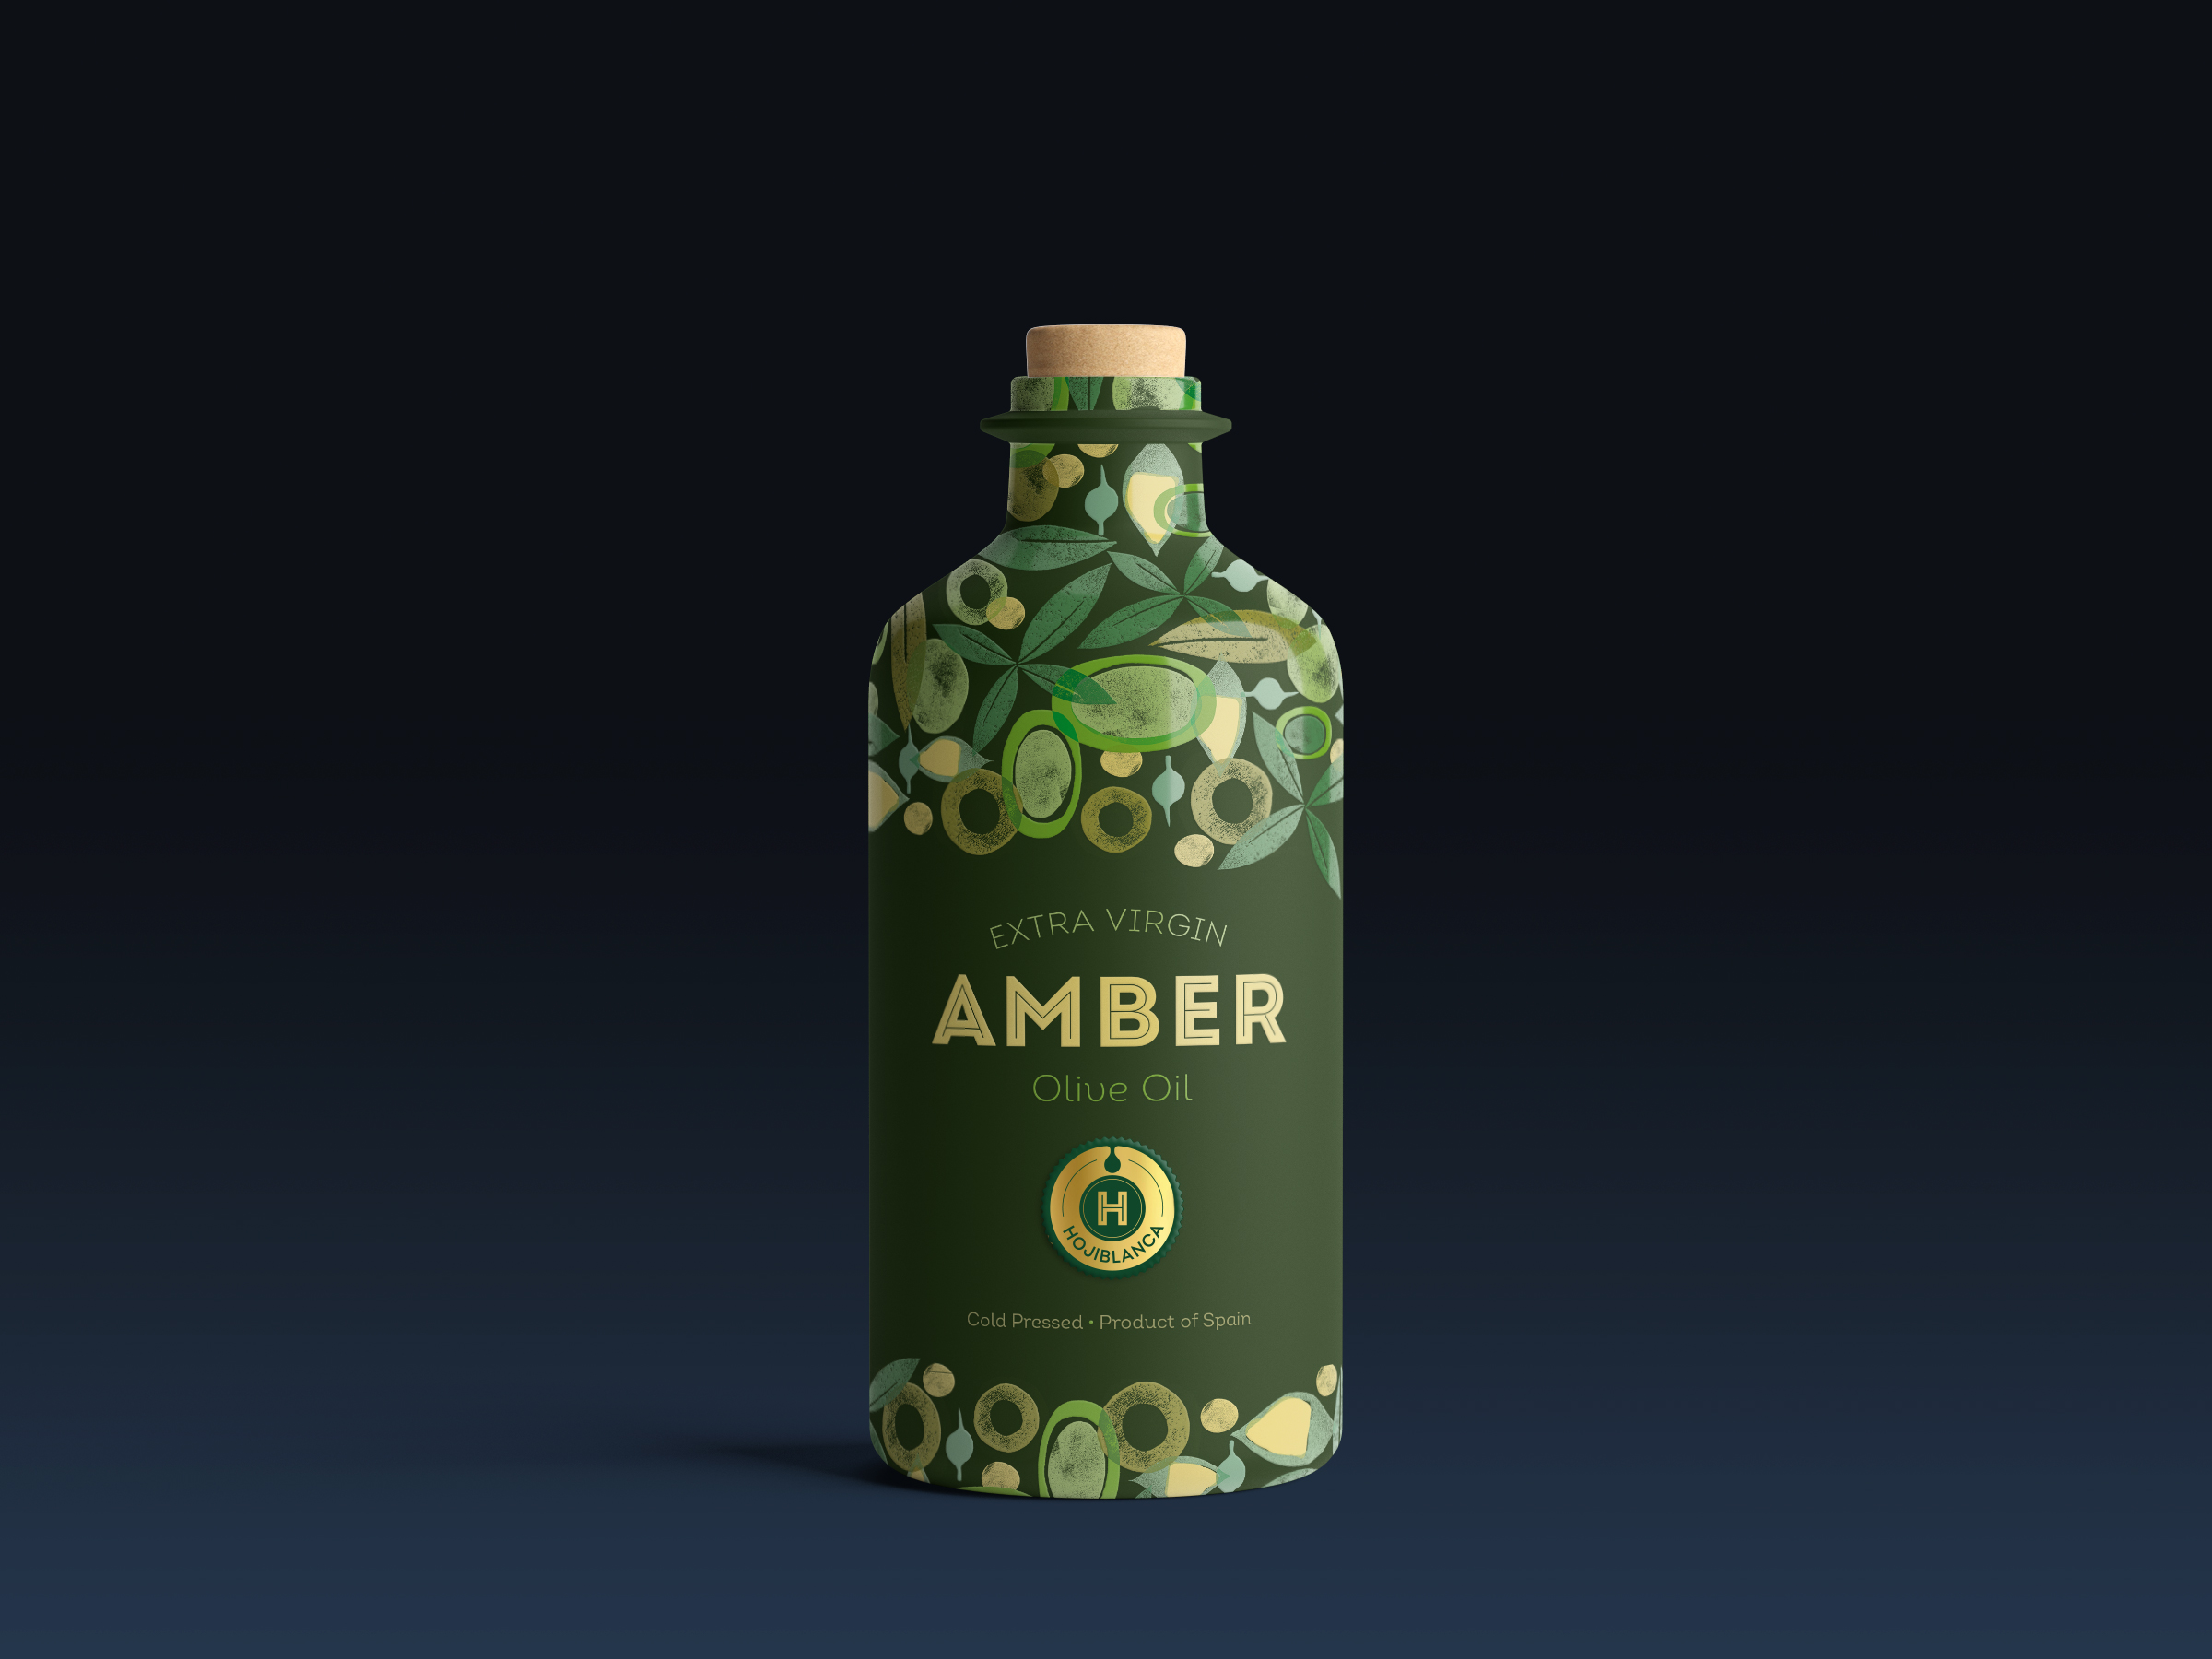 Gorgeous design of olive oil bottles for Amber by Tea for two  - Creative Work - $i